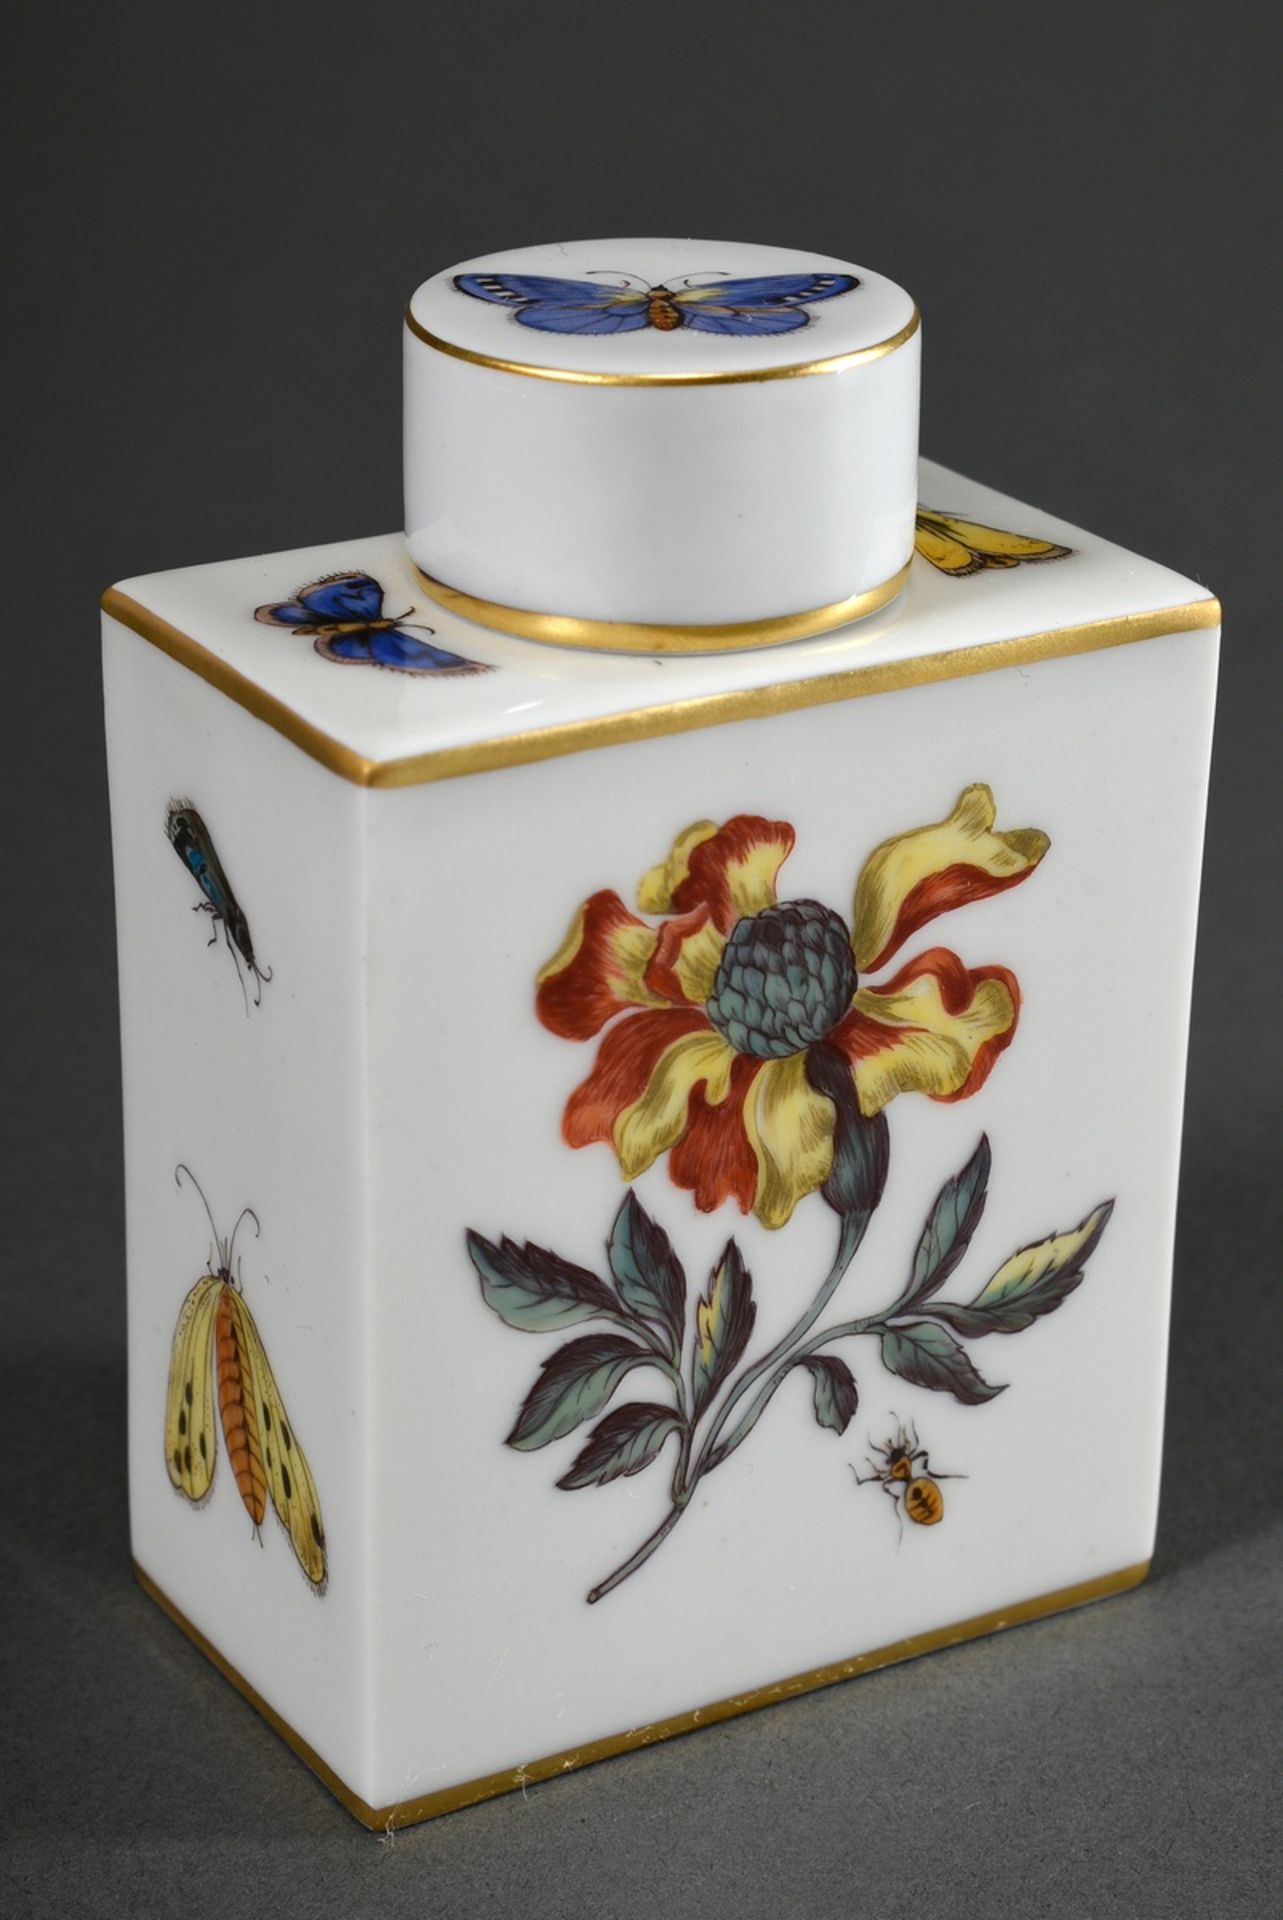 Meissen tea caddy with polychrome painting "woodcut flowers and insects" and gold decoration, 20th 